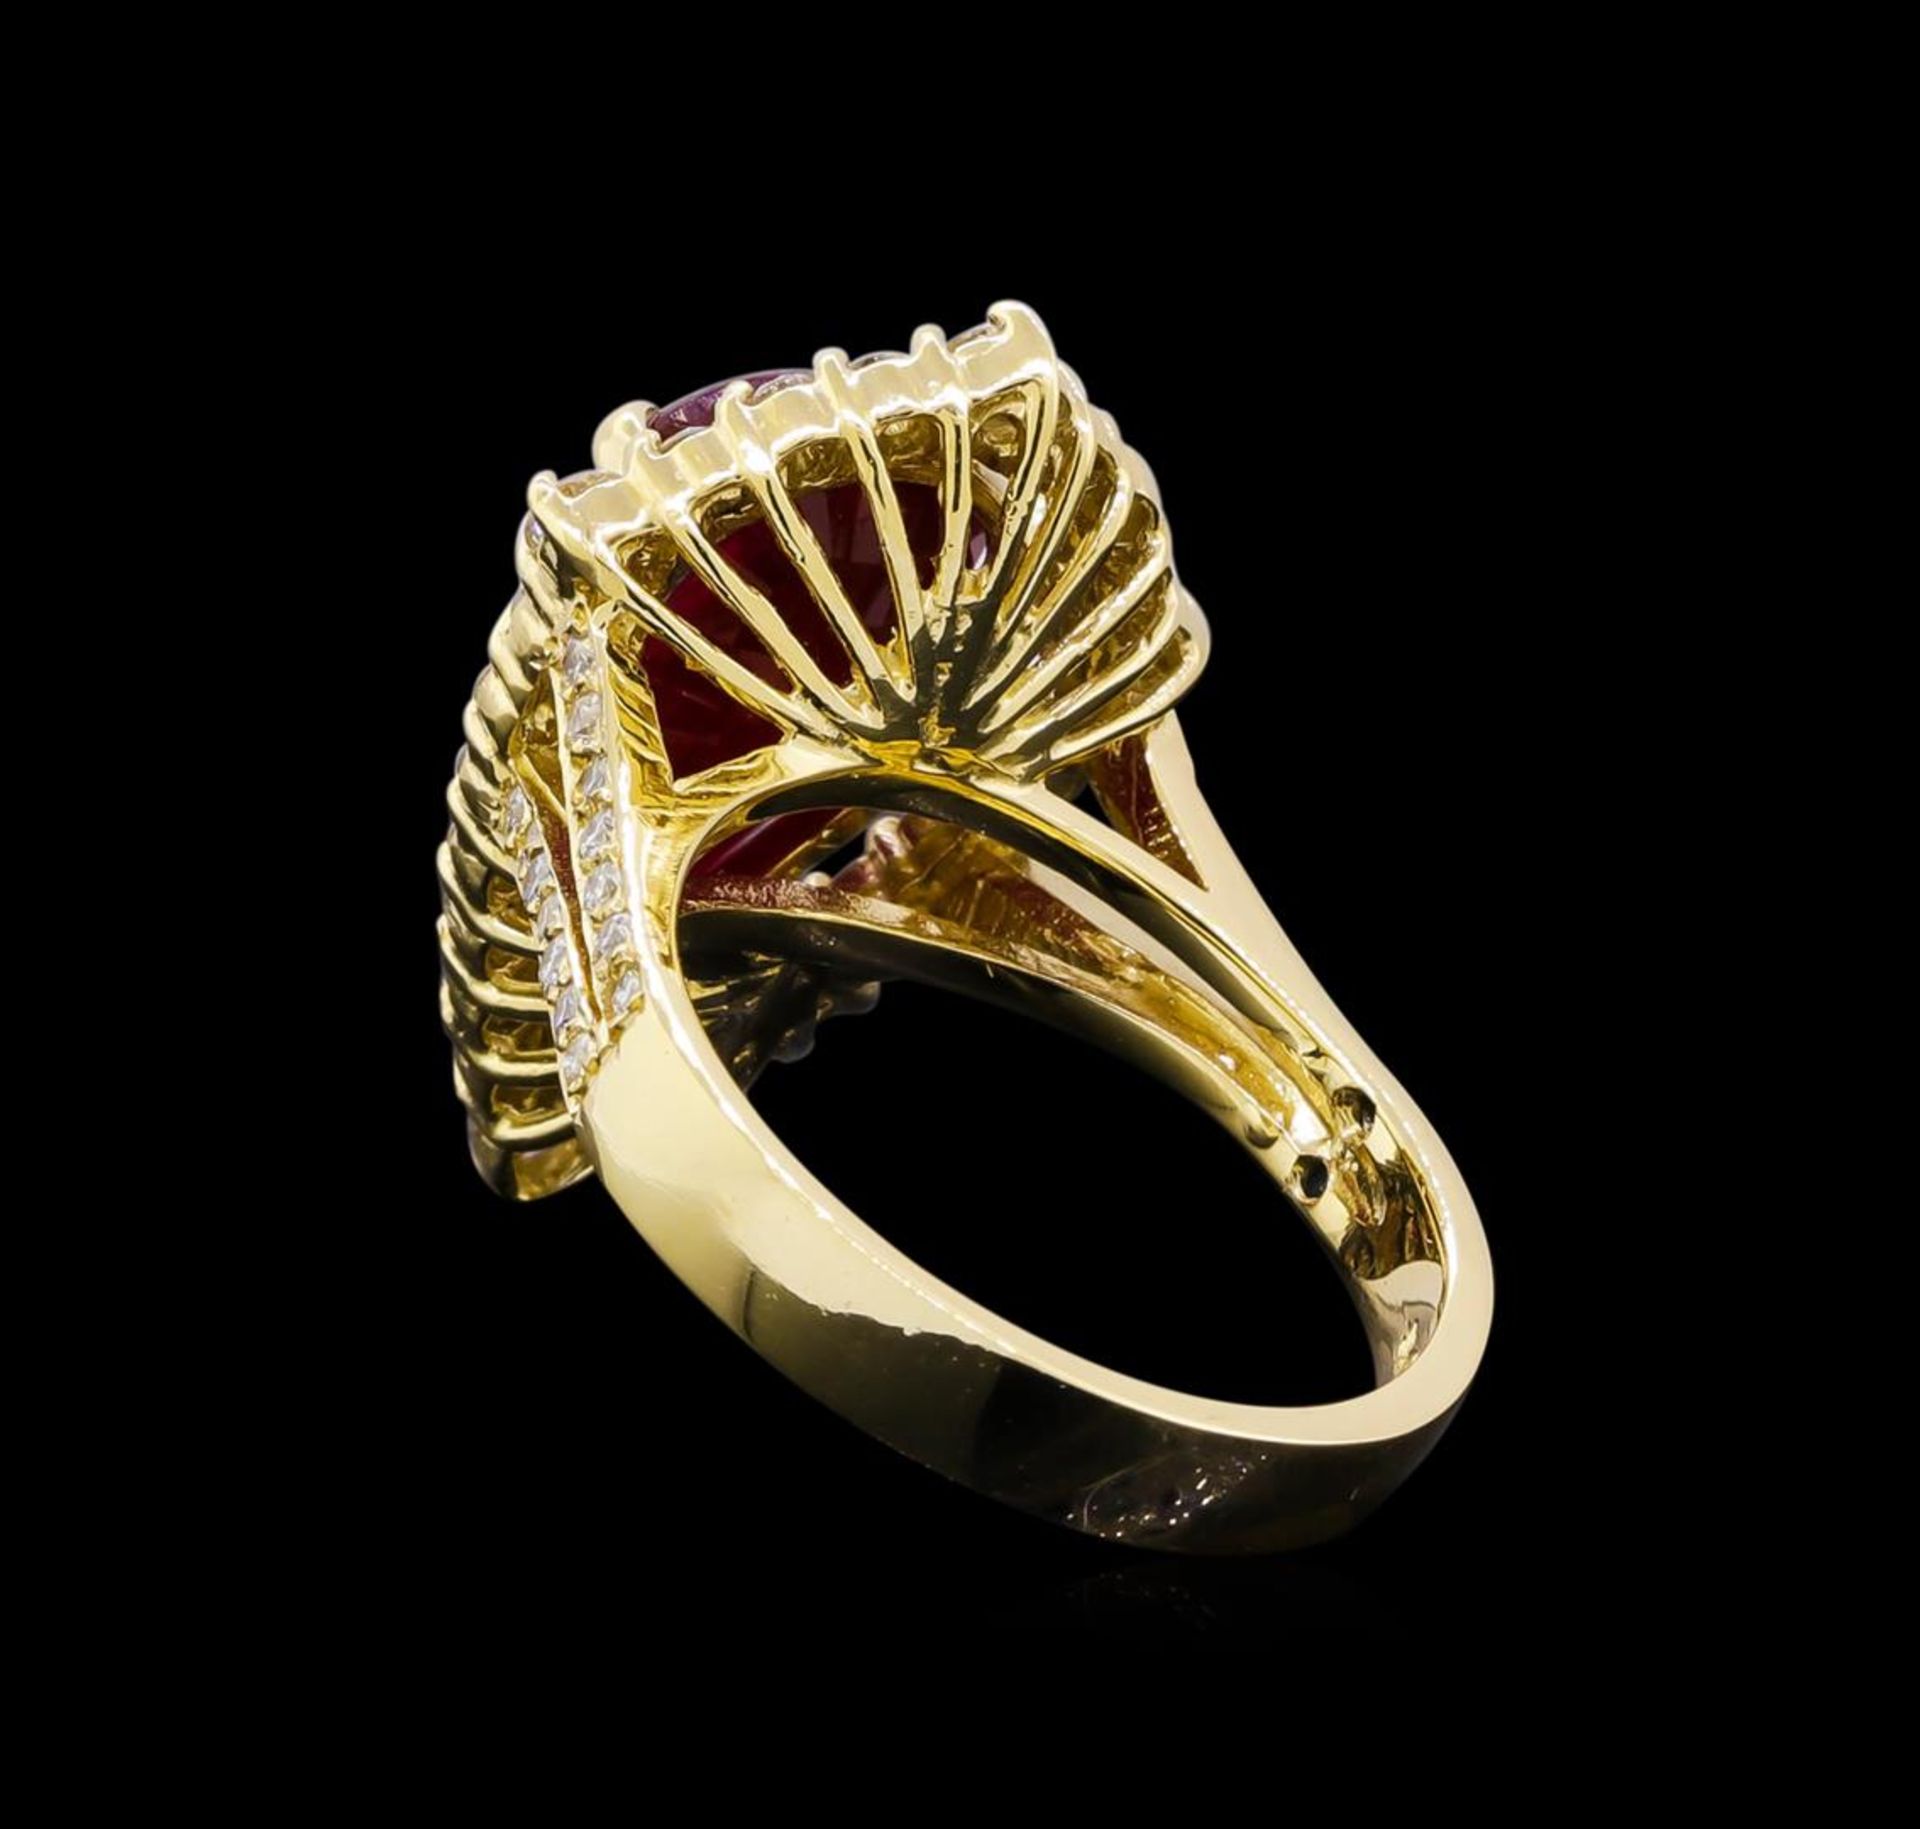 GIA C 5.98 ctw Ruby and Diamond Ring - 14KT Yellow Gold - Image 3 of 7